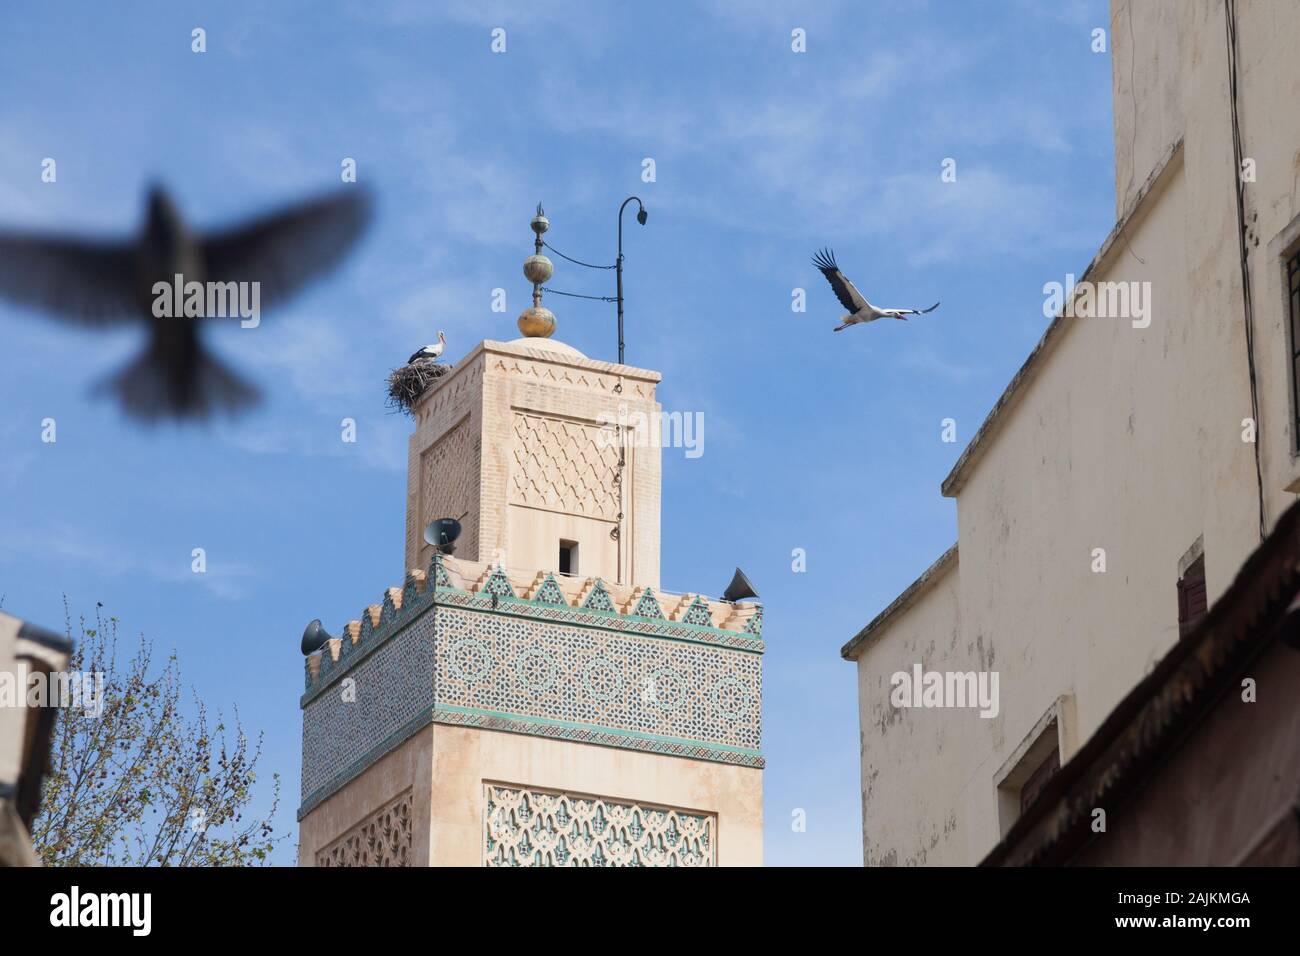 Two white storks – one flying and one in the nest on the minaret of Al-Hamra Mosque (or Red Mosque) in Fes (Fez) and the blurry image of another bird Stock Photo